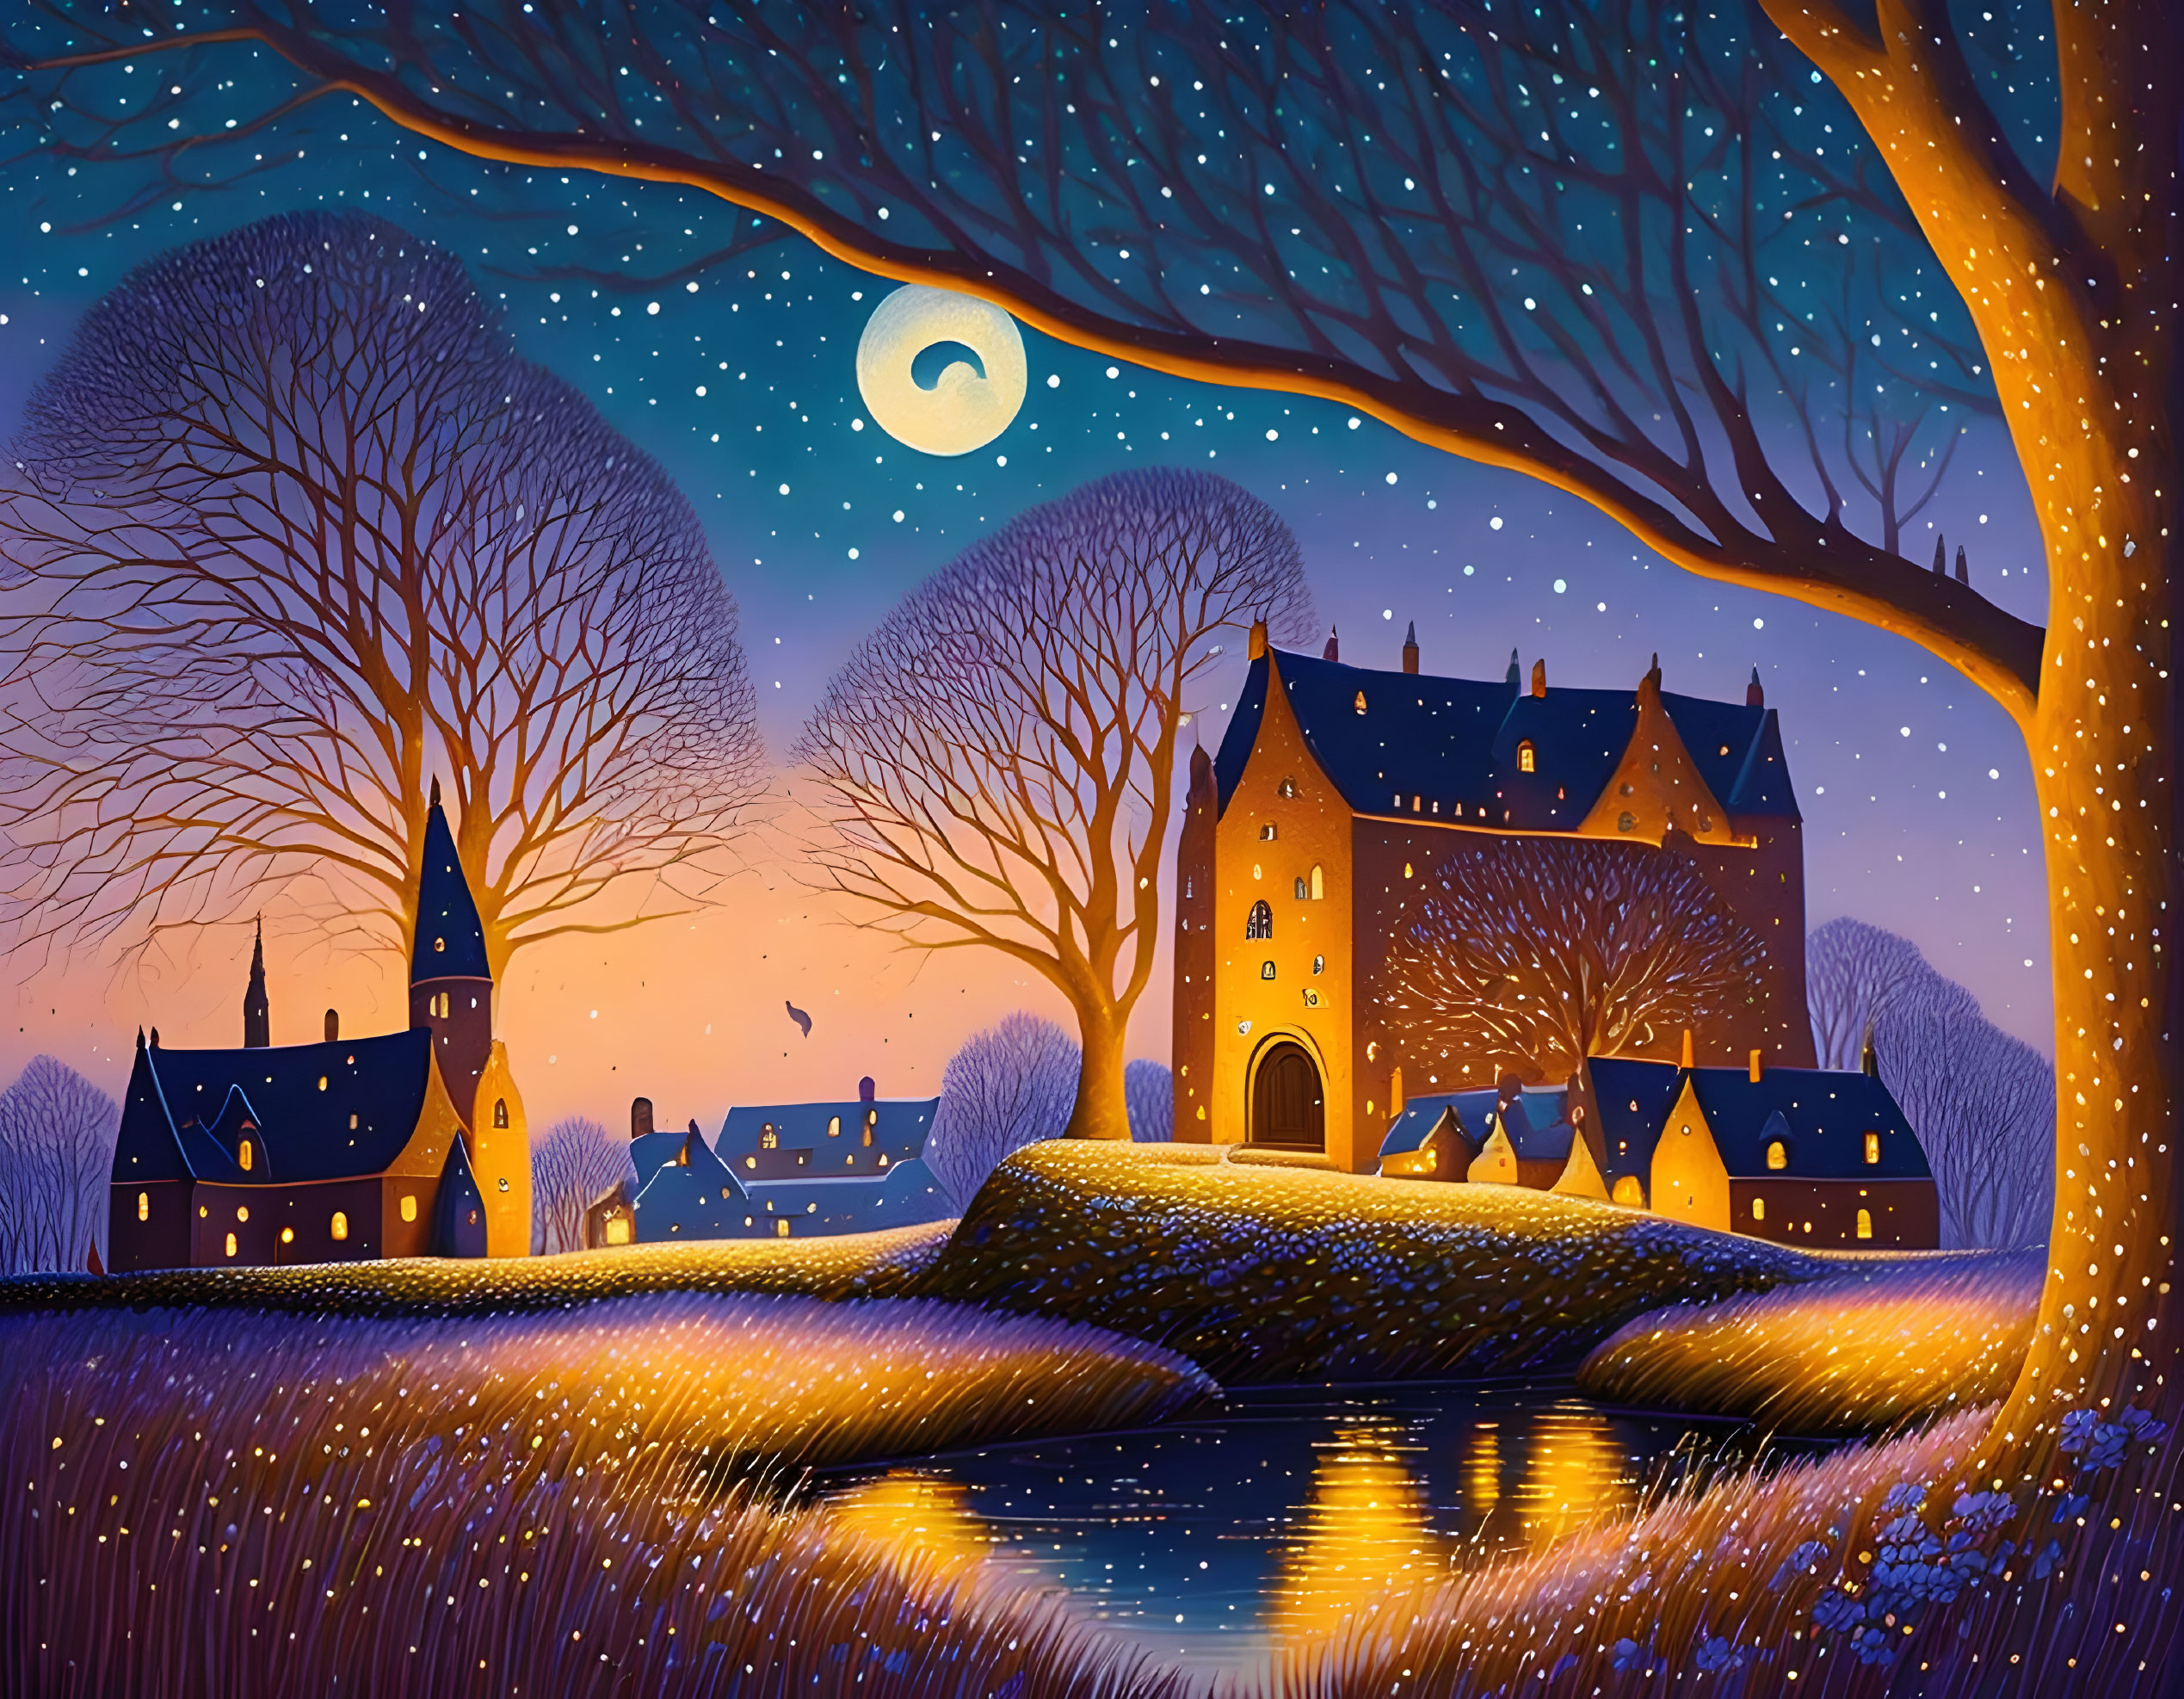 Tranquil moonlit village with cozy houses and bare trees